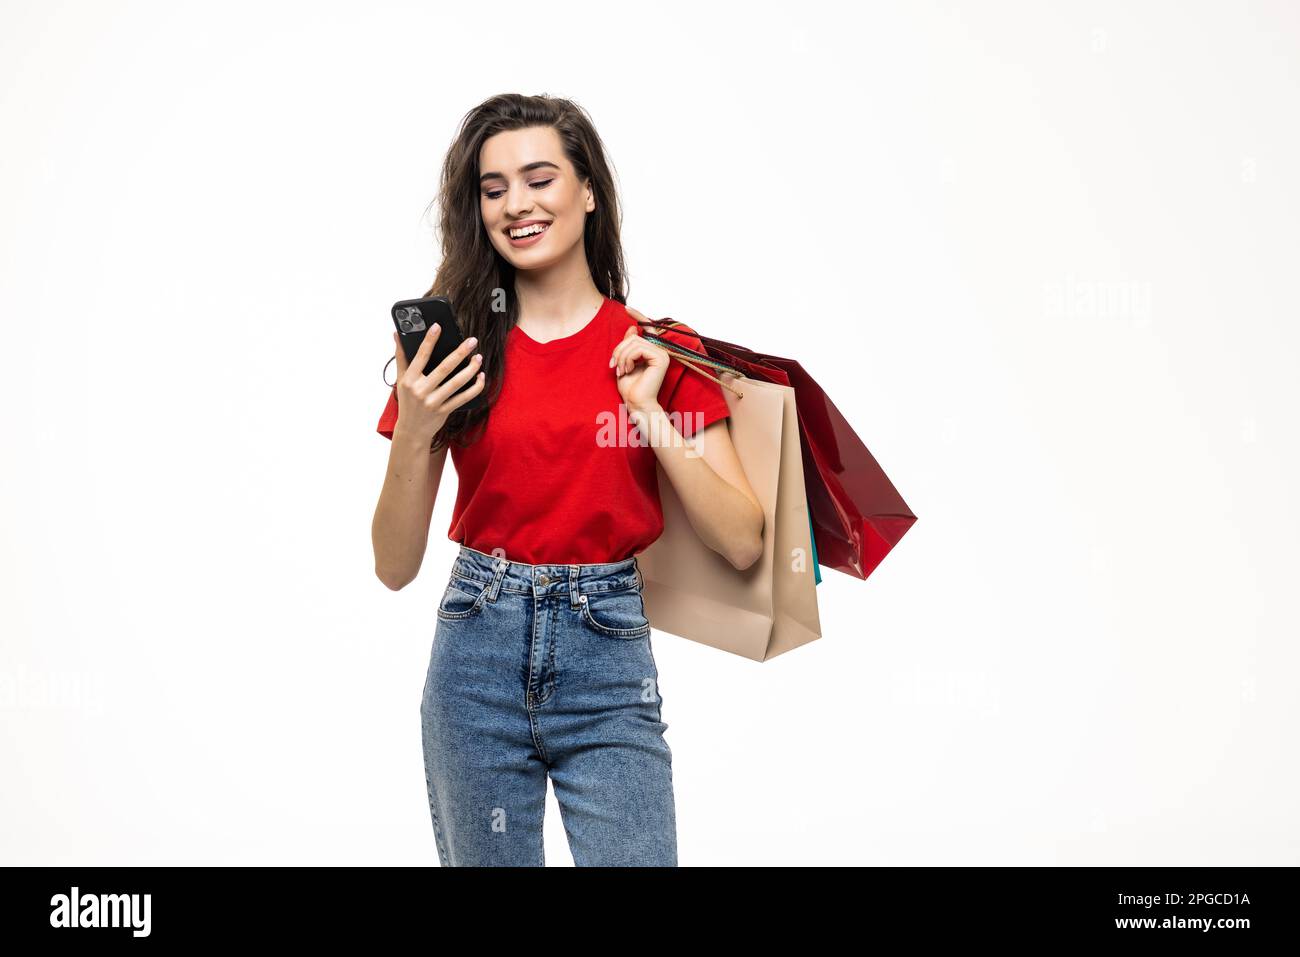 Online shopping. Beautiful young woman holding shopping bags and using her smartphone with smile while standing against white background Stock Photo